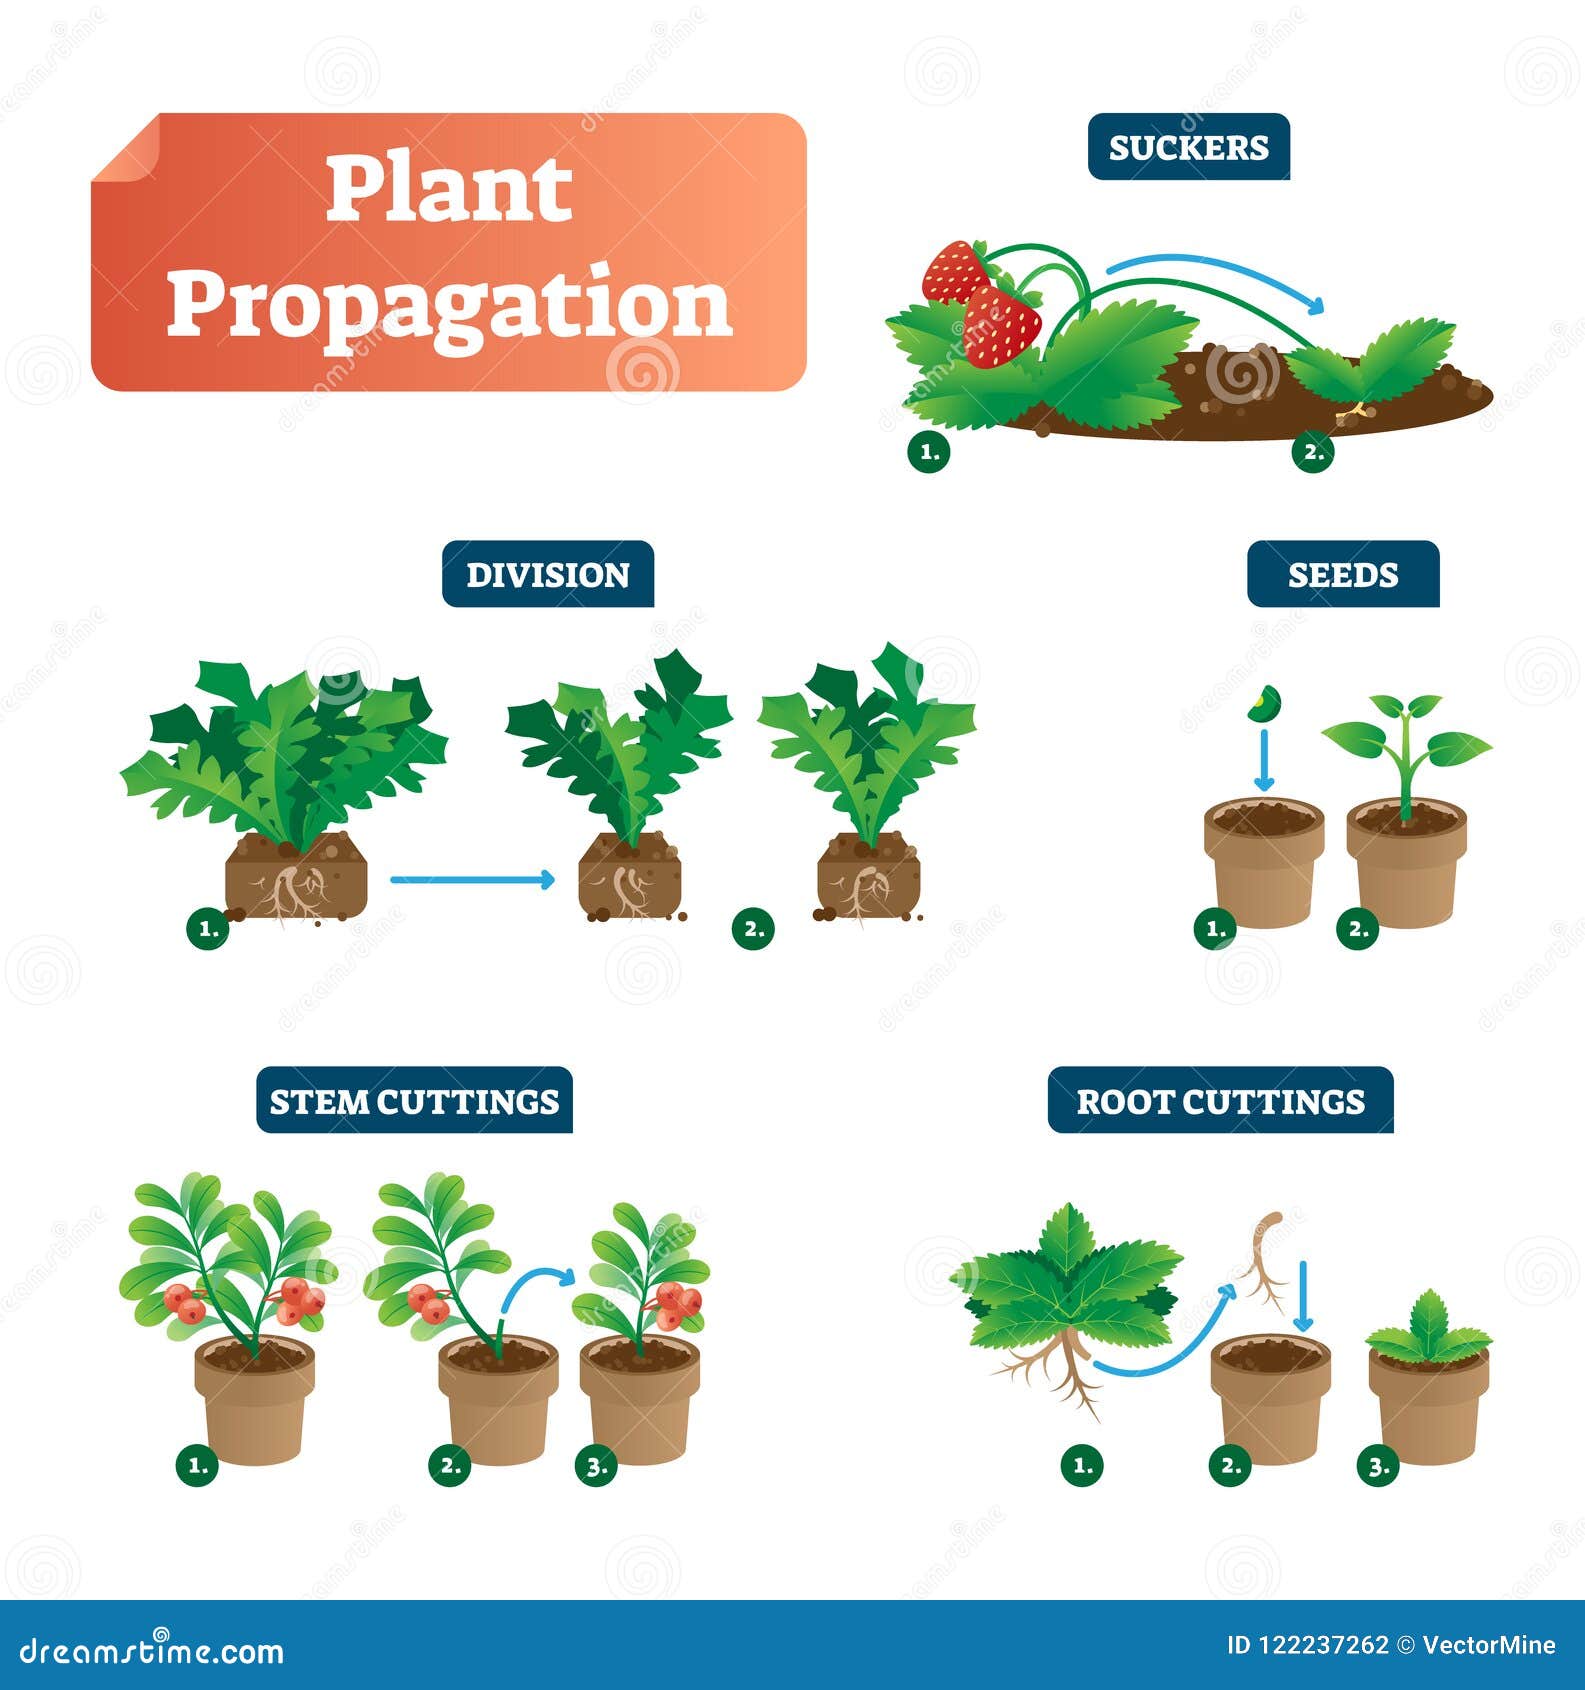 plant propagation   diagram. scheme with biological labels on suckers, division, seeds, stem and root cuttings.